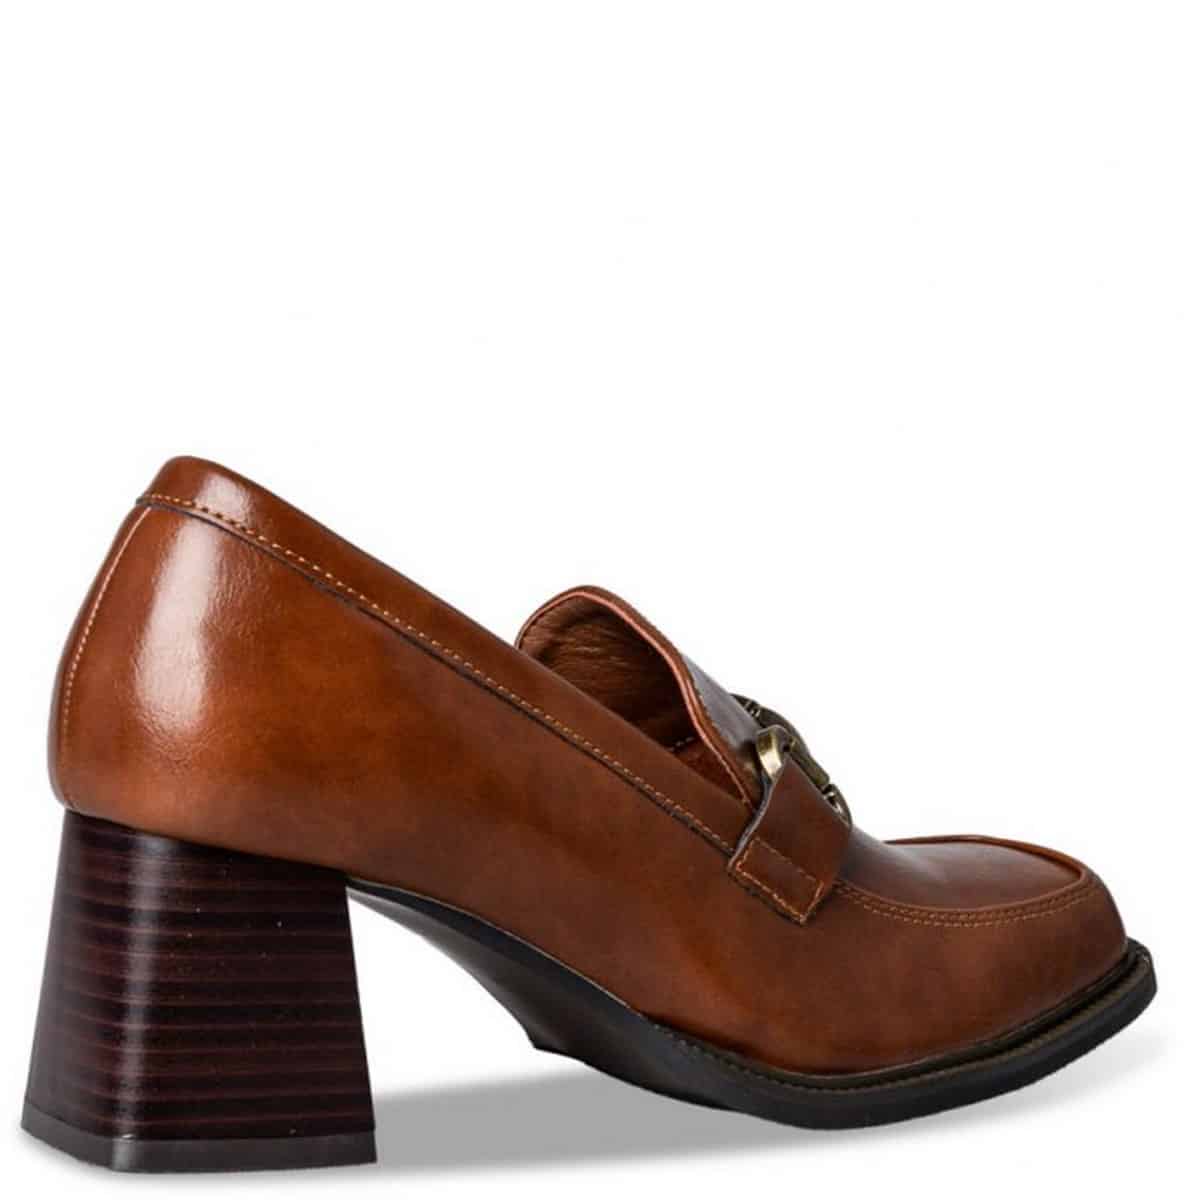 LOAFERS WITH THICK HEEL V57-18186-26 ENVIE SHOES CAMEL